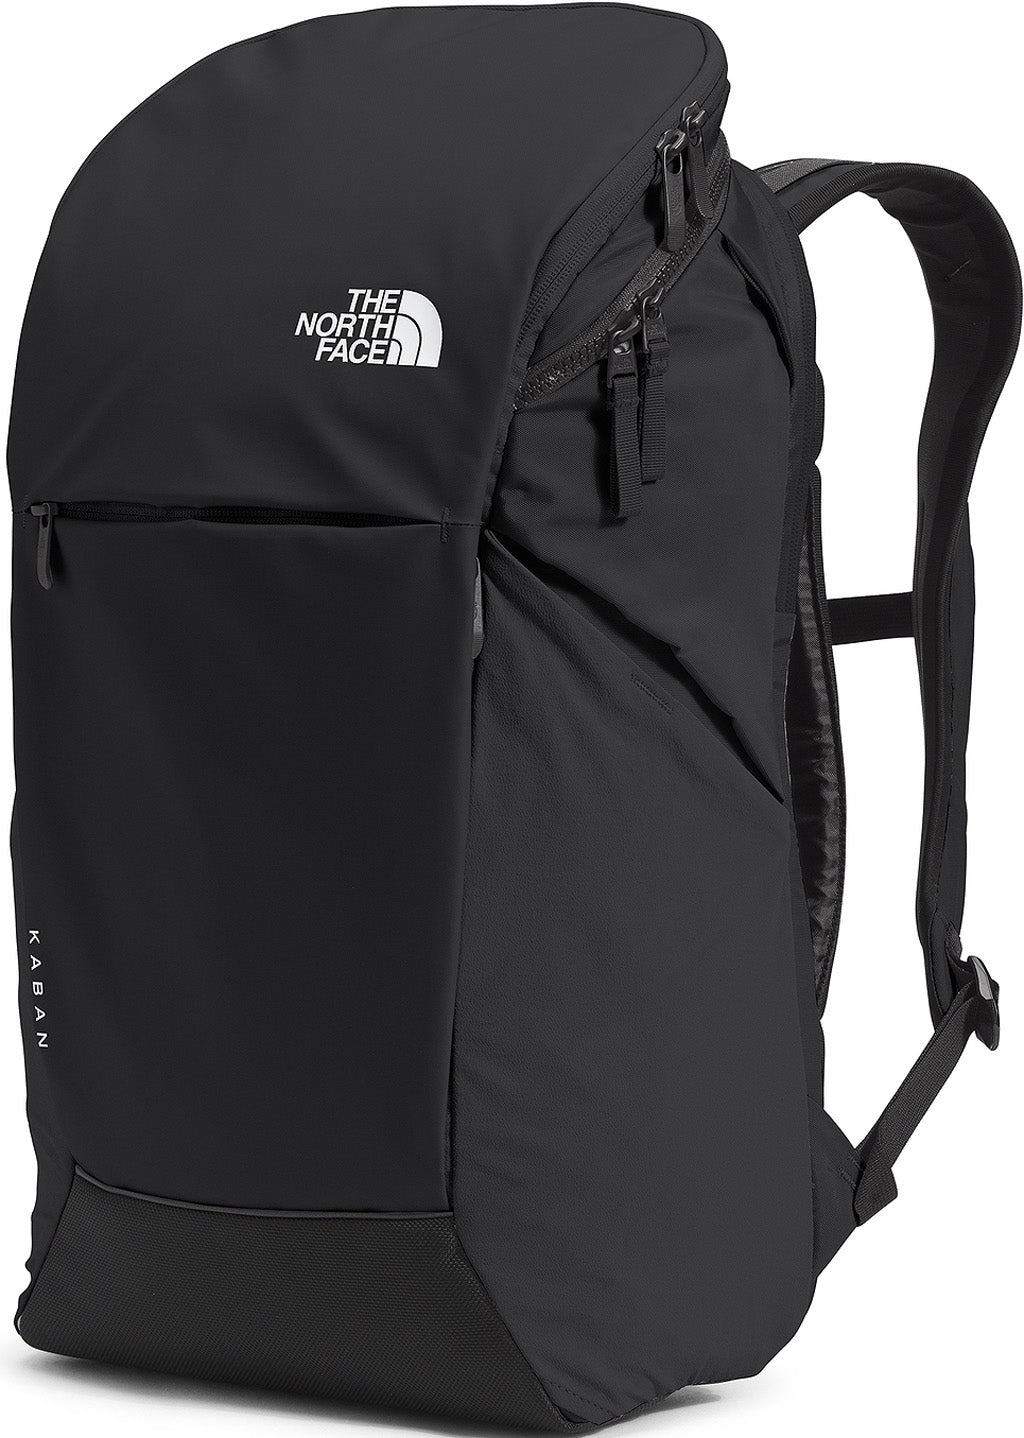 The North Face Kaban 2.0 Backpack - Unisex | Altitude Sports